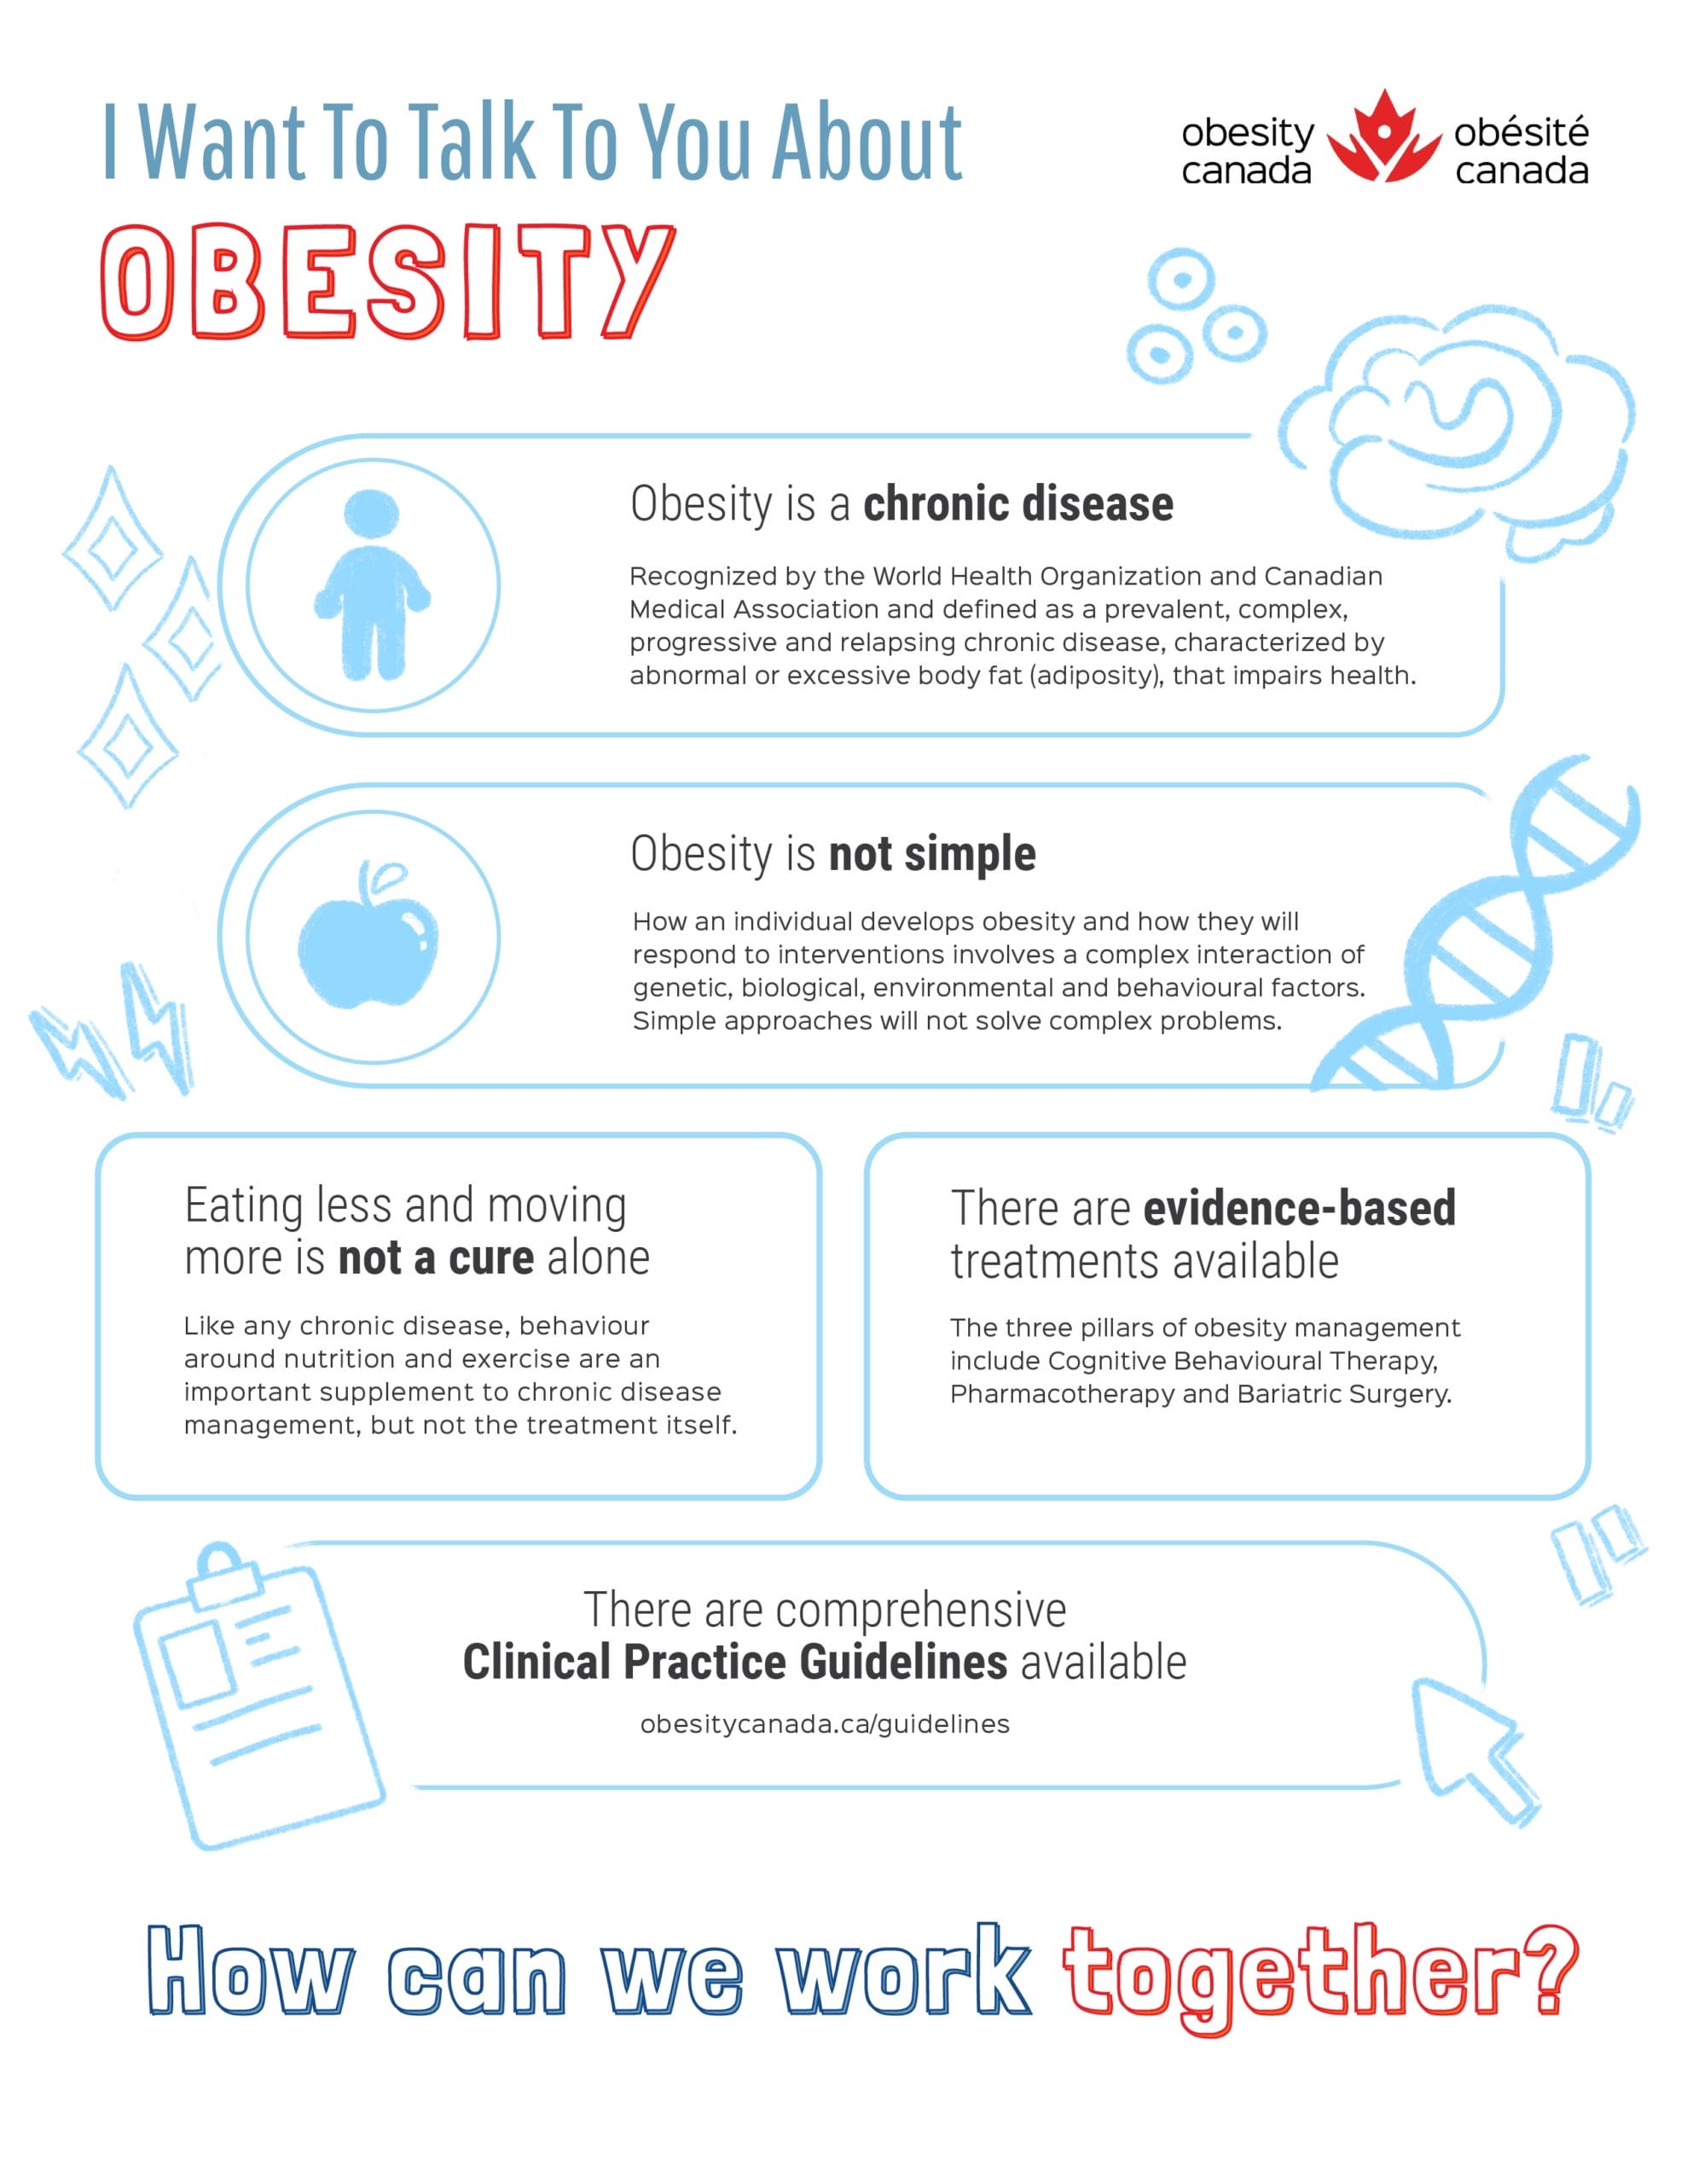 An informative flyer by obesity canada outlining obesity as a chronic disease, highlighting causes, treatments, and advocating for comprehensive clinical practice guidelines.